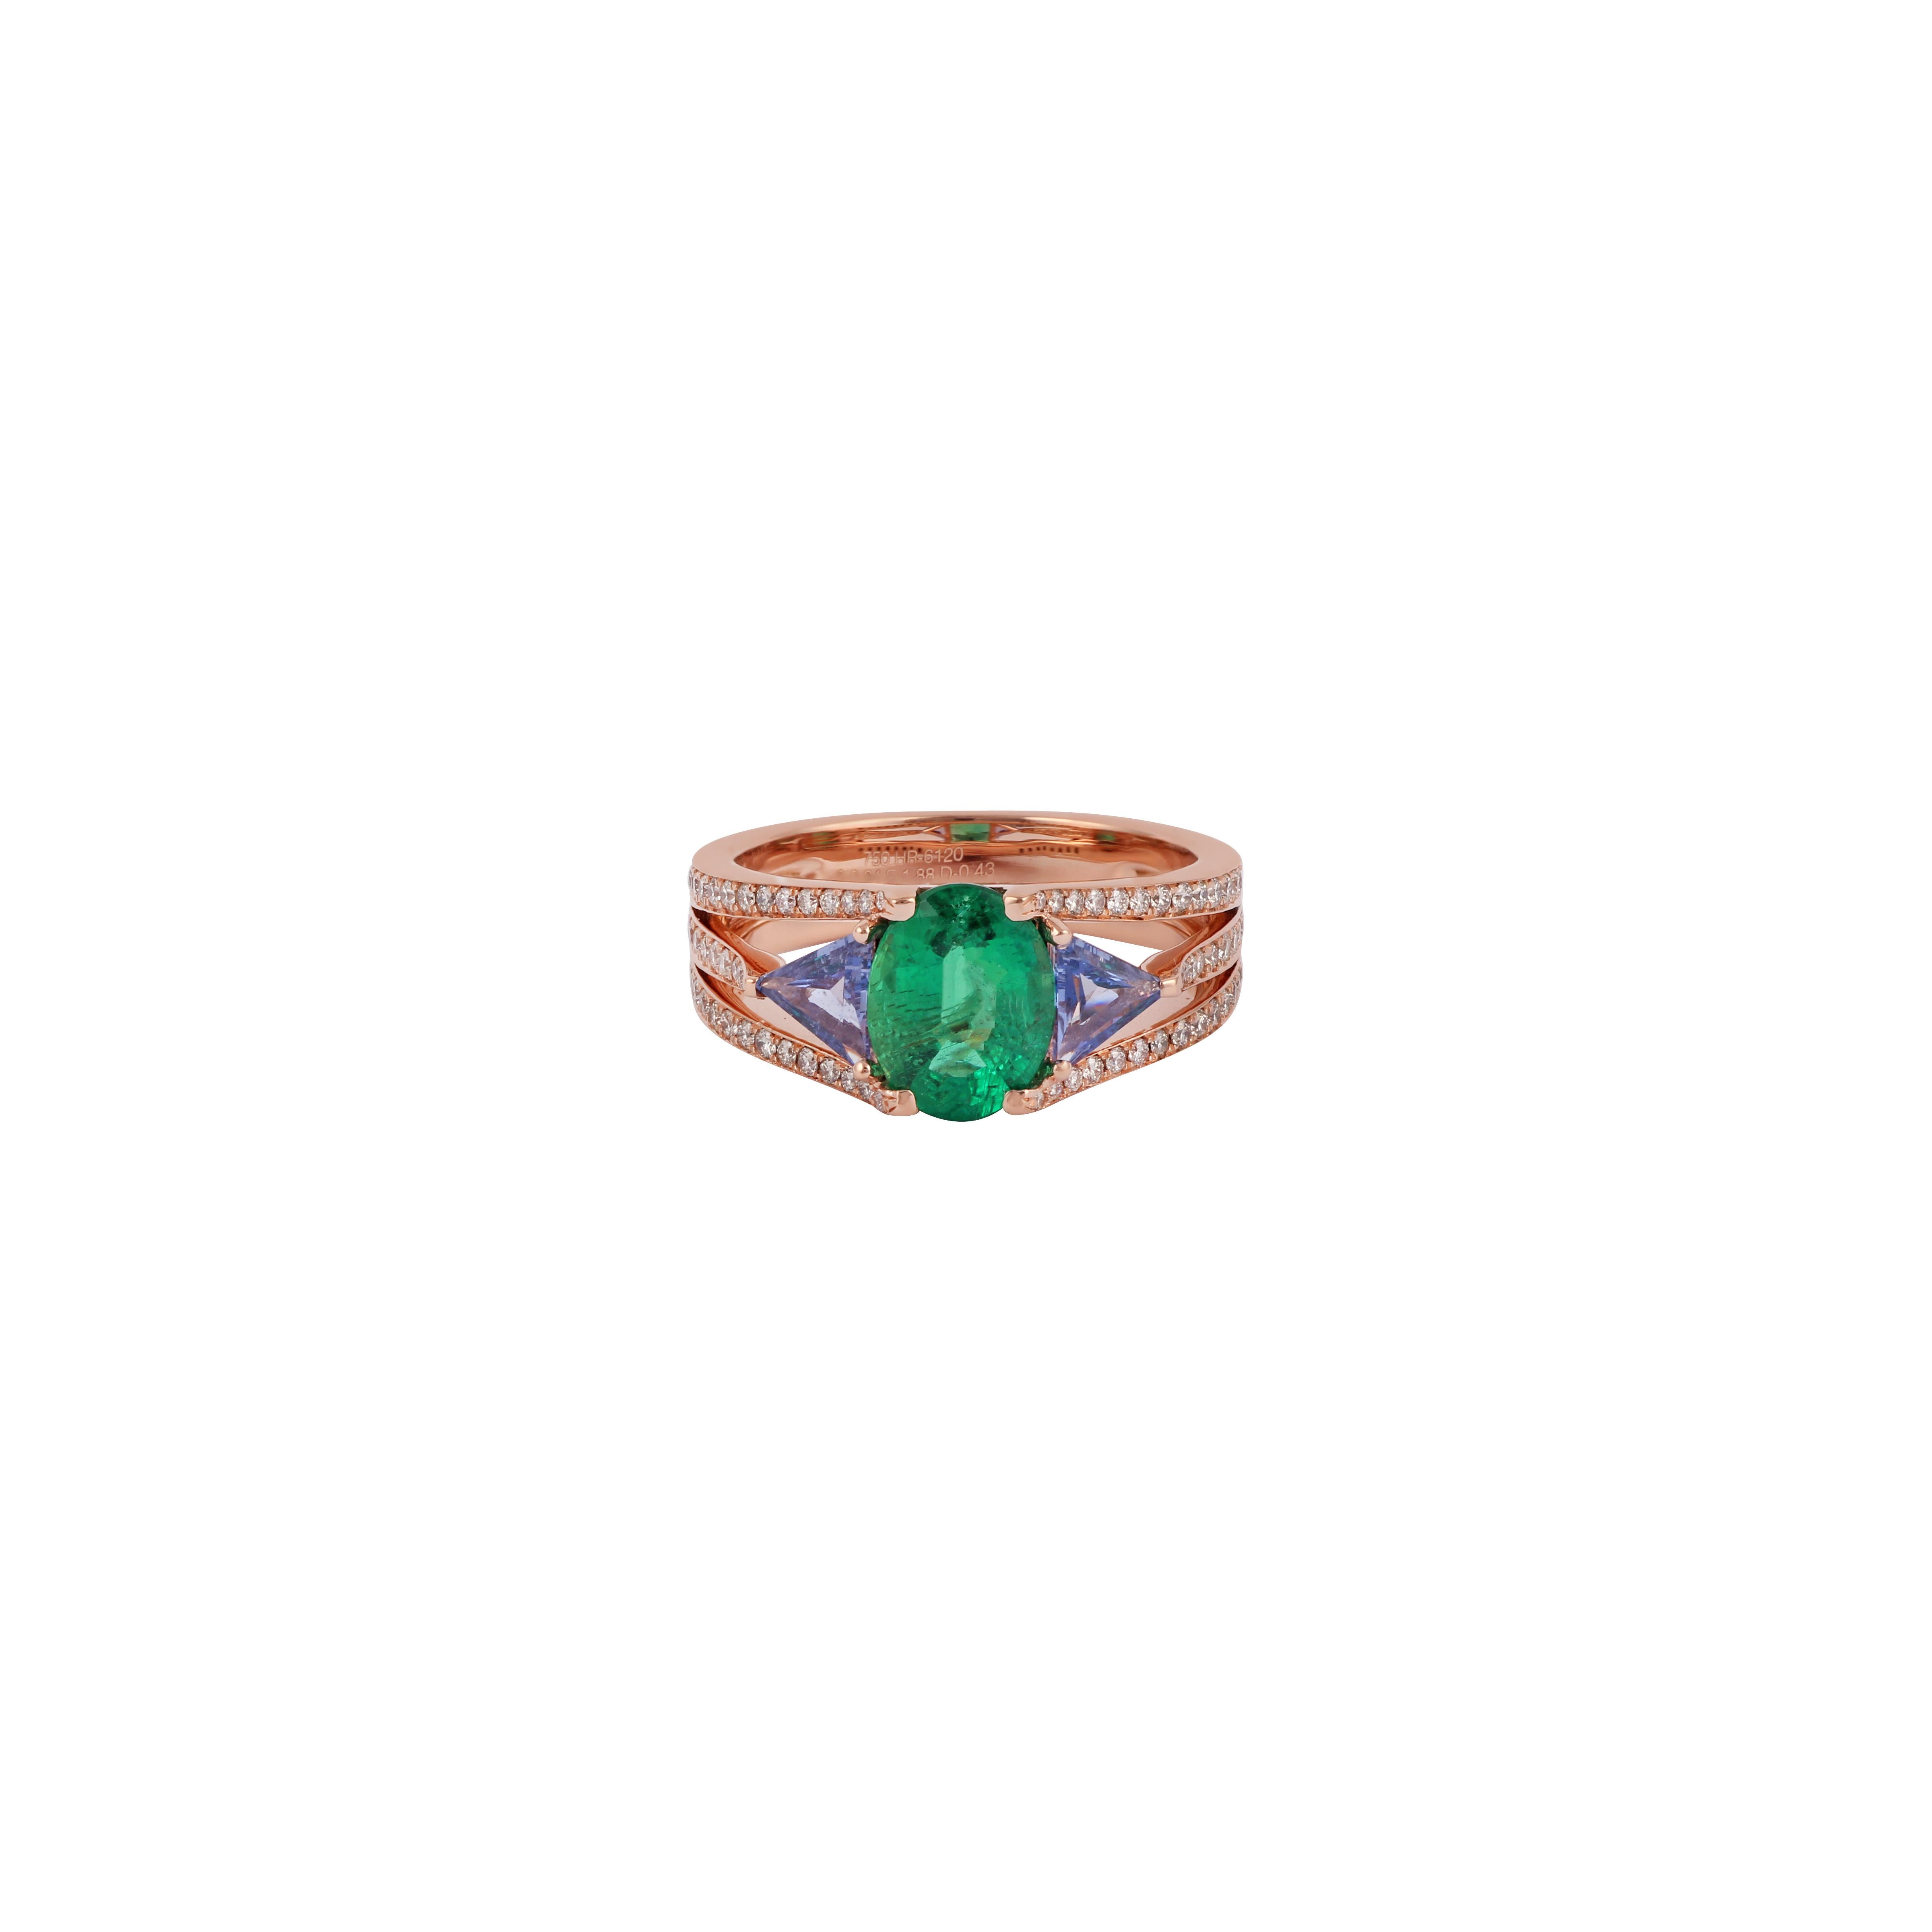 Its an elegant ring studded in 18k rose gold with 1 oval shaped fine quality emerald weight 1.88 carat with both sides 2 trilliant shaped sapphire weight 0.64 carat & 74 round shaped diamond weight 0.43 carat, this entire ring studded in 18k rose